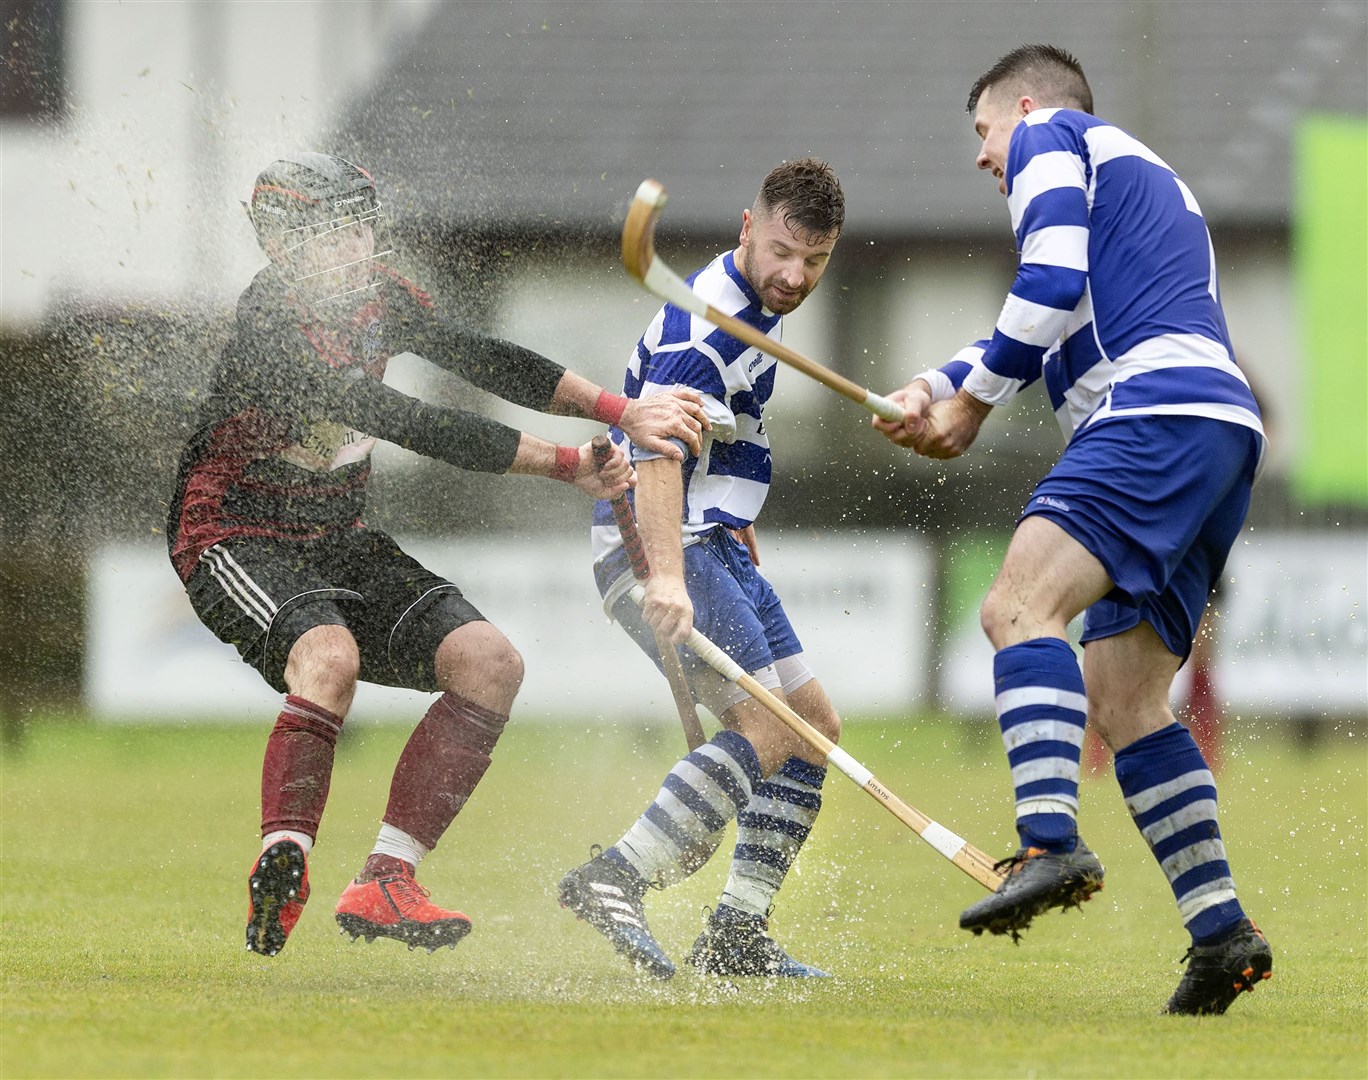 Renewing rivalries this weekend: Malcolm Clark (Oban) with Drew and Steven MacDonald (both Newtonmore) during last year's Tulloch Homes Camanachd Cup final played at An Aird, Fort William.